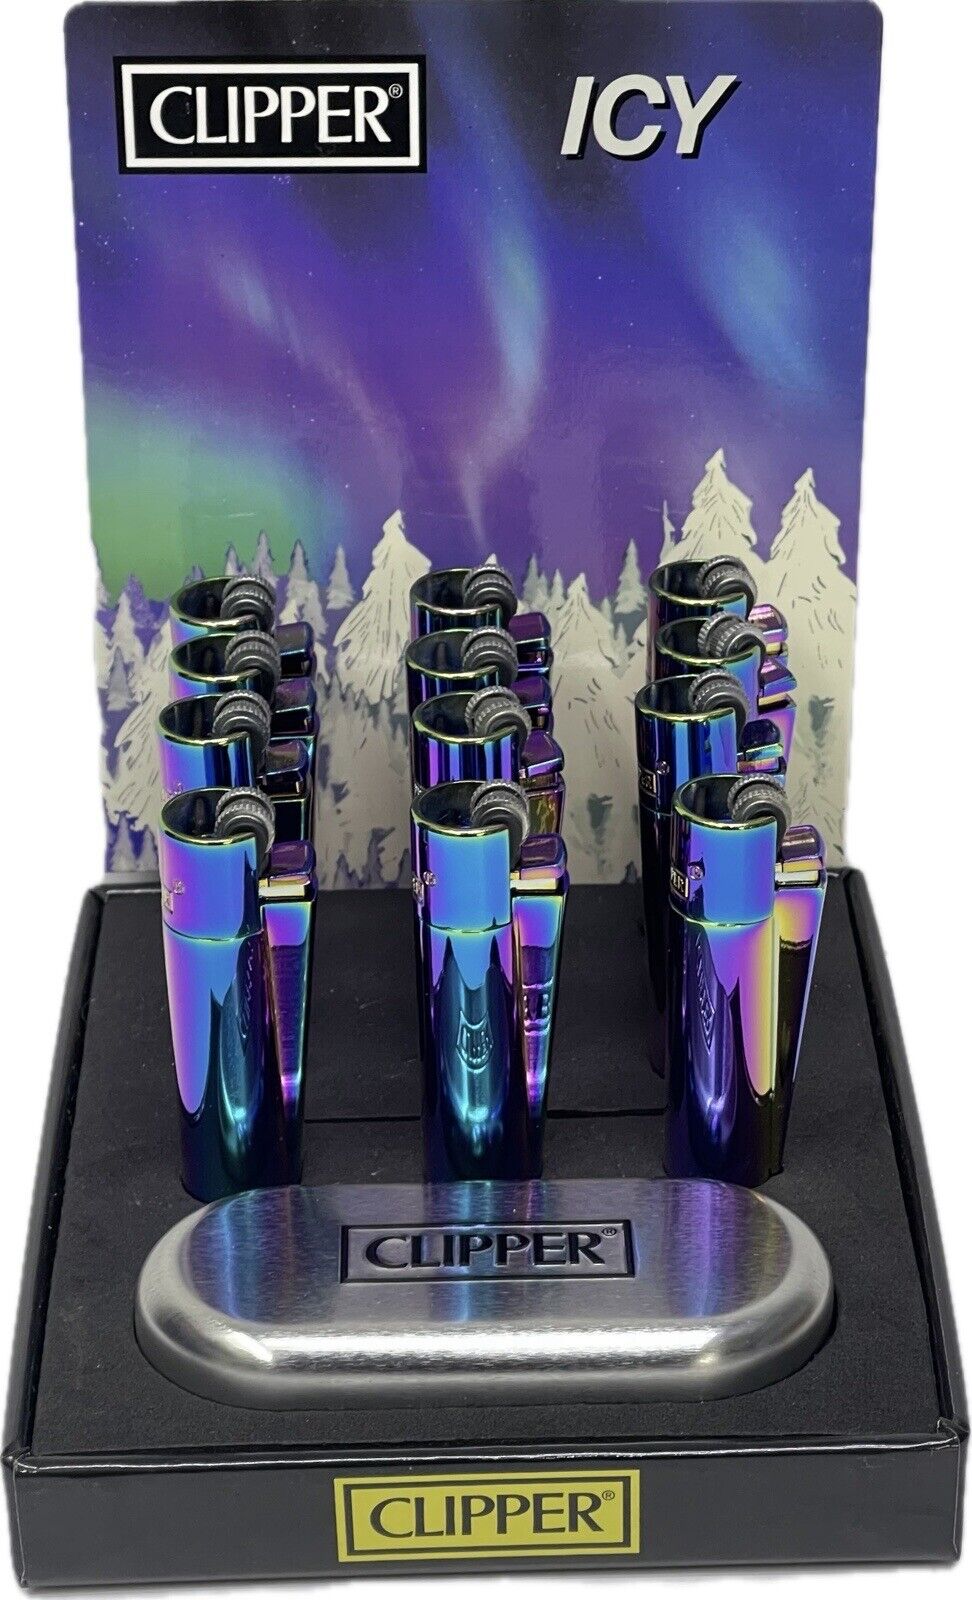 1x Full Size Refillable (ICY) Metal Clipper Lighter W/ Gift Box *Free Shipping*